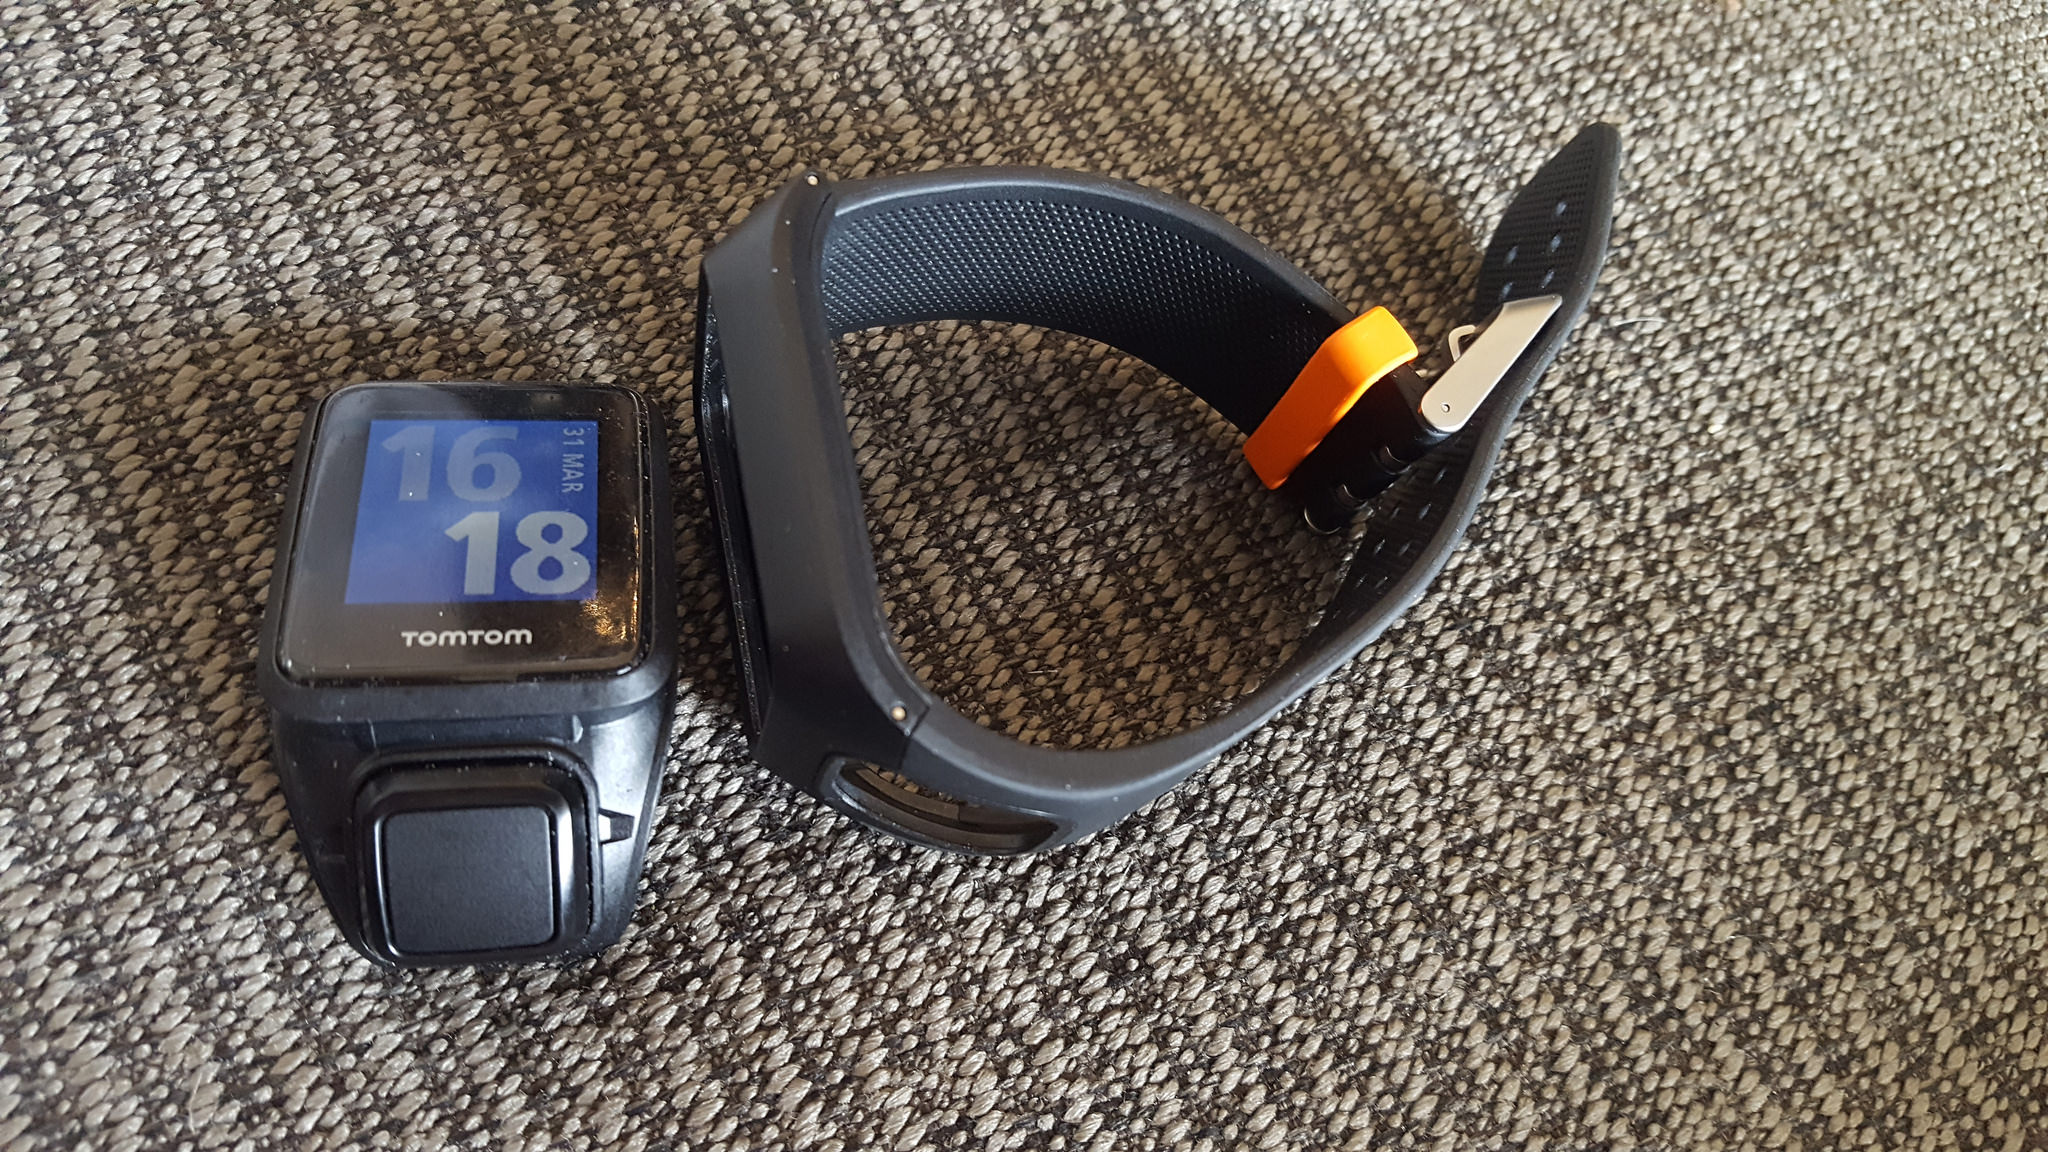 Initial impressions of the TomTom Adventurer Outdoor GPS Watch